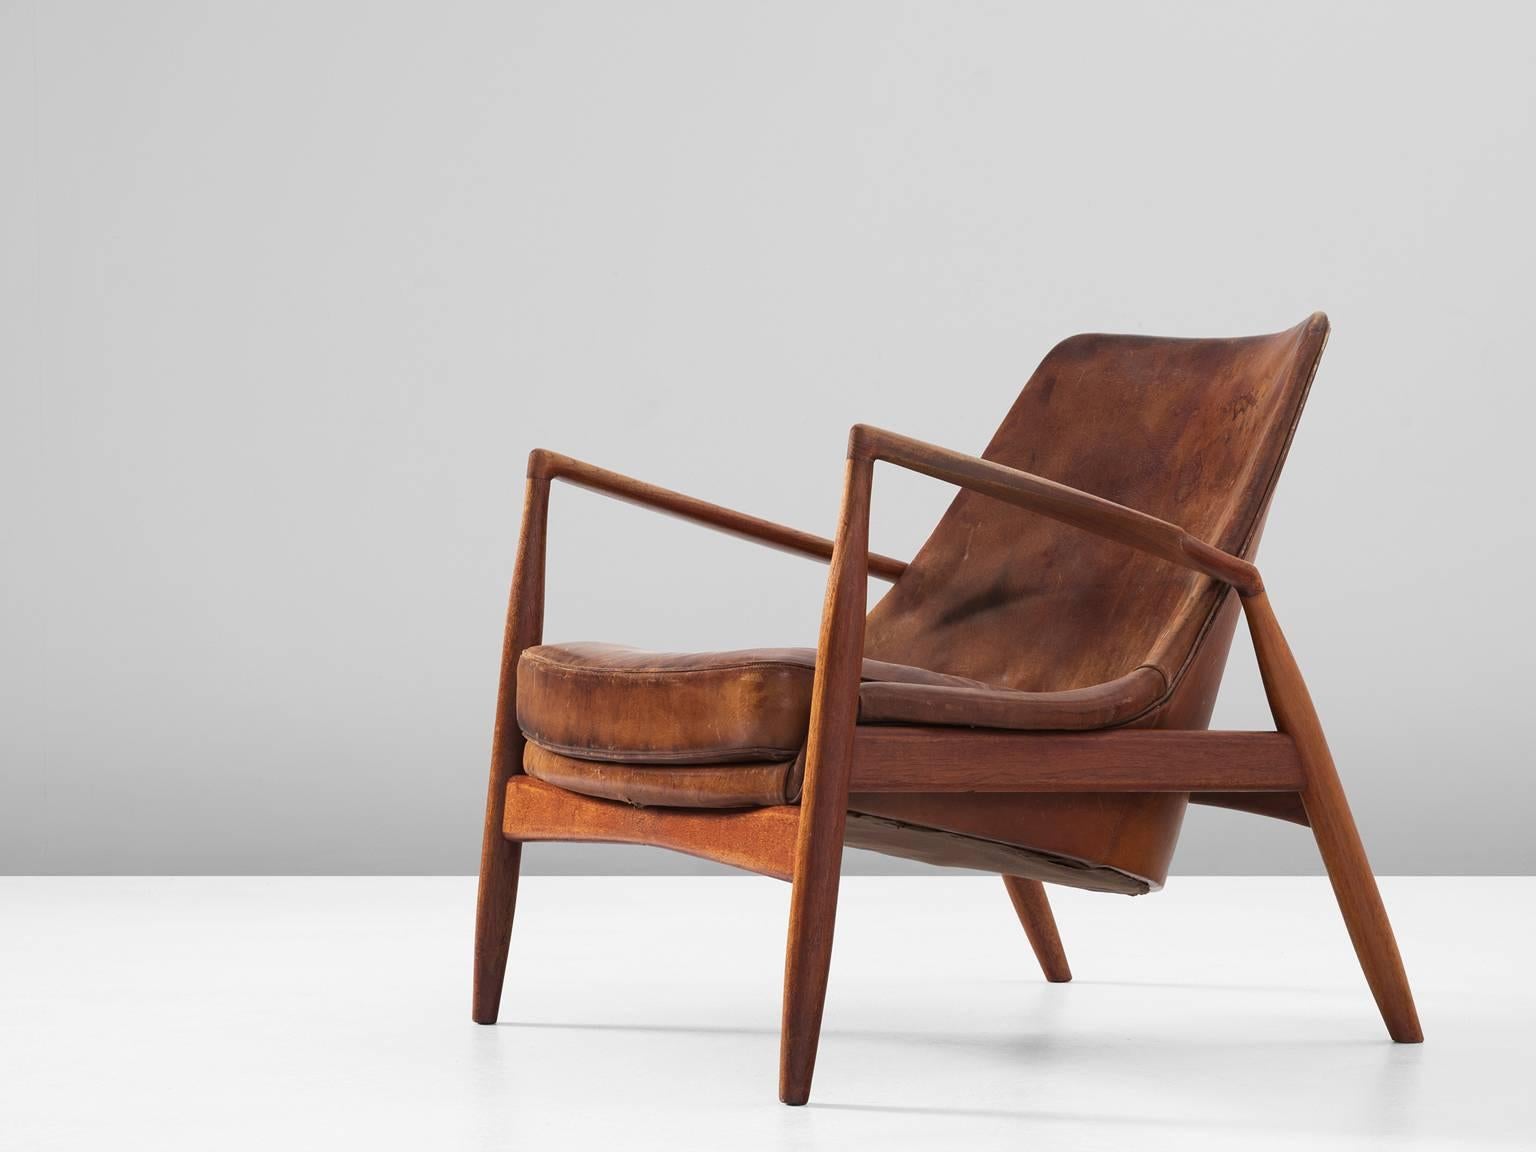 Lounge chair 'Seal' model 503-799, in teak and leather, by Ib Kofod-Larsen for OPE, Sweden, 1956. 

Beautiful and iconic Seal lounge chair. The well crafted frame of this chair is made in solid teak. It shows very nice details and wood joint, and